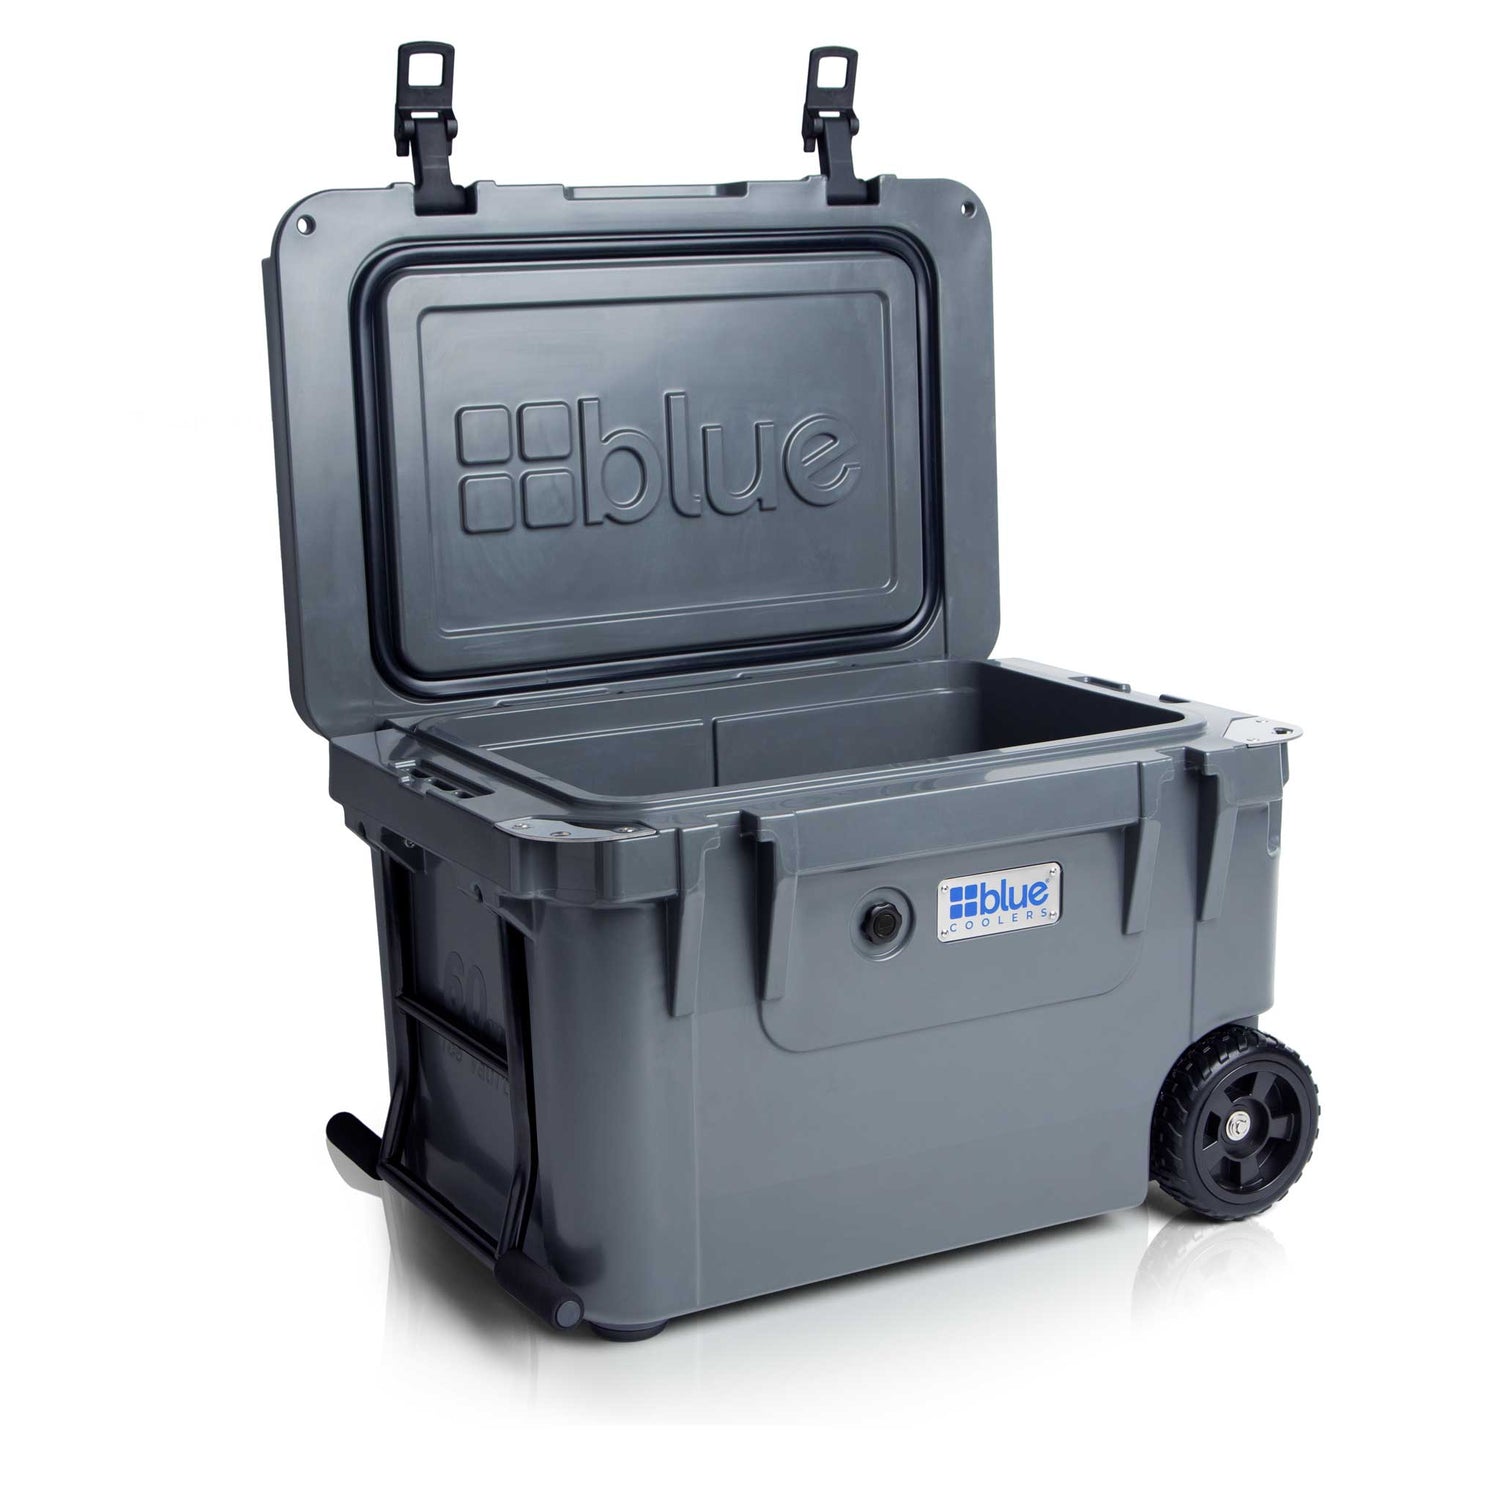 60 Quart Ice Vault Roto-Molded Cooler with Wheels